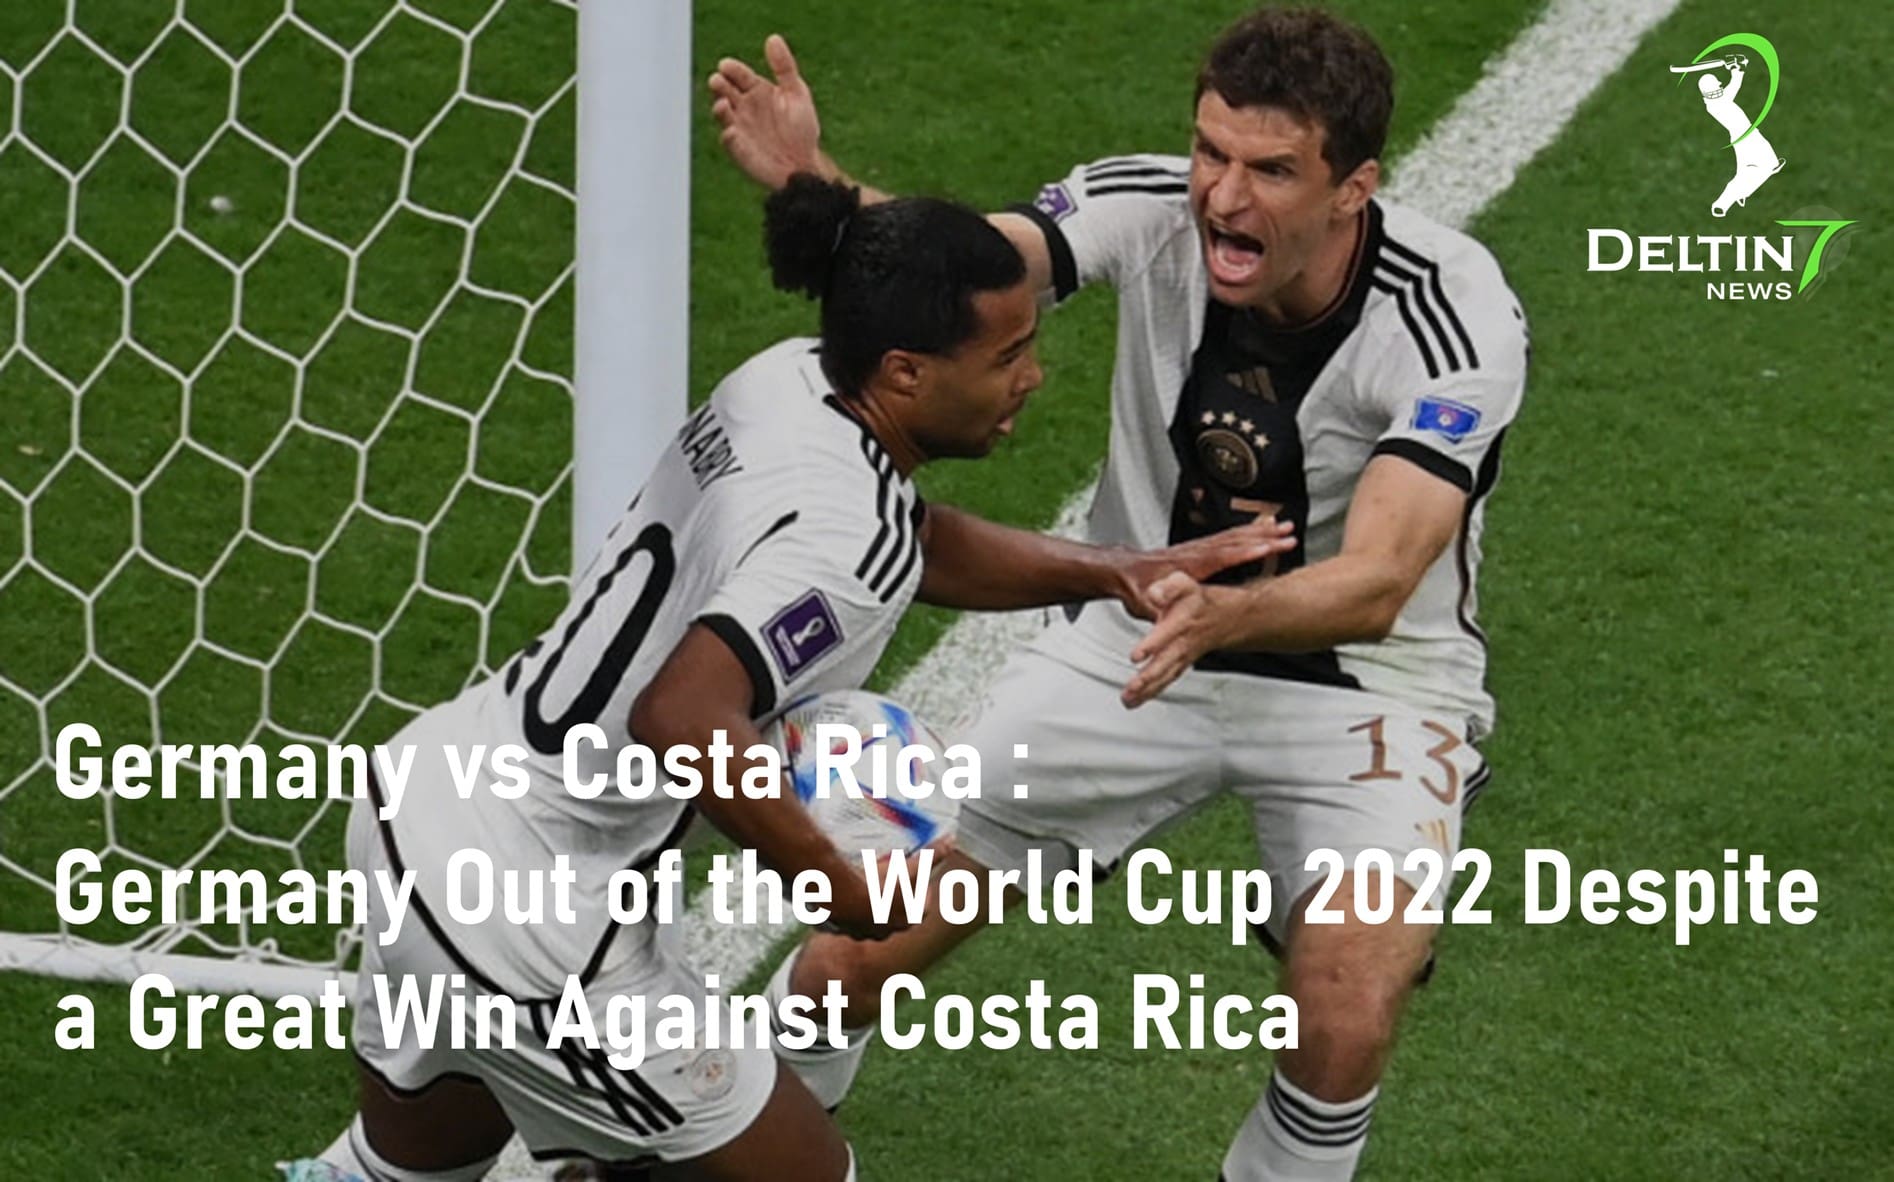 Germany vs Costa Rica World Cup 2022